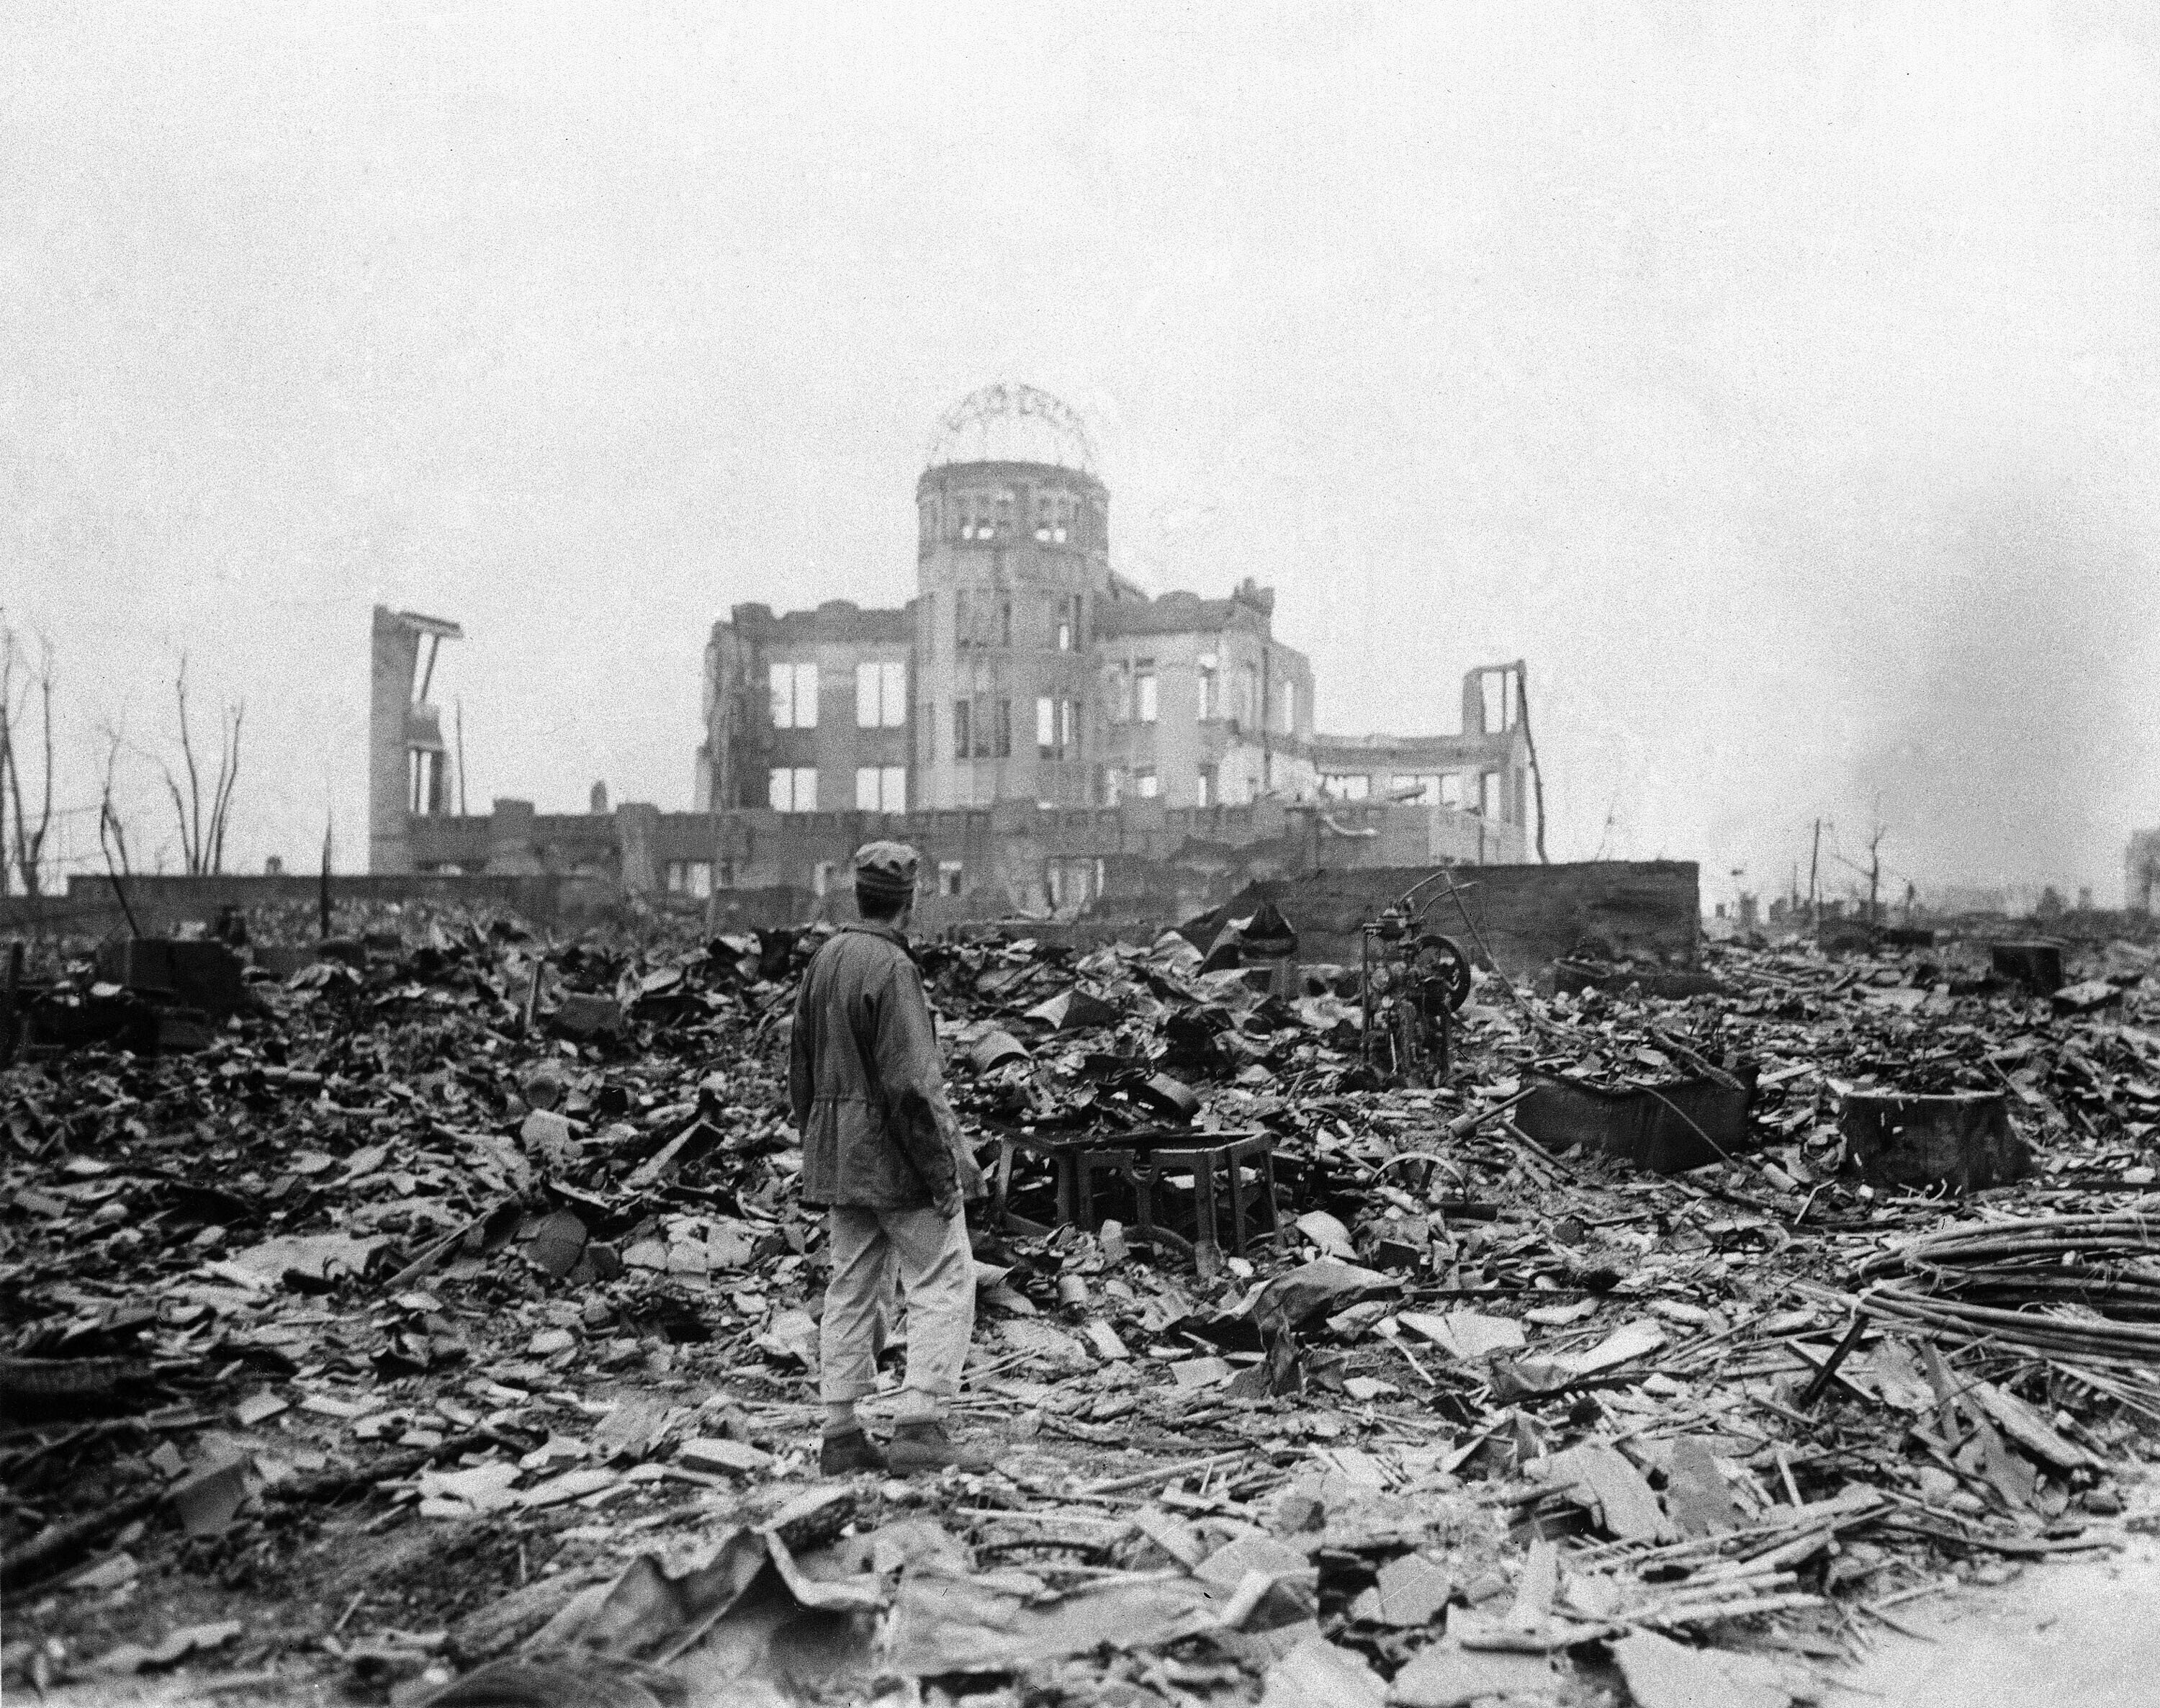 An allied correspondent stands in a sea of rubble before the shell of a building that once was a movie theater in Hiroshima, western Japan, Sept. 8, 1945. (AP Photo)